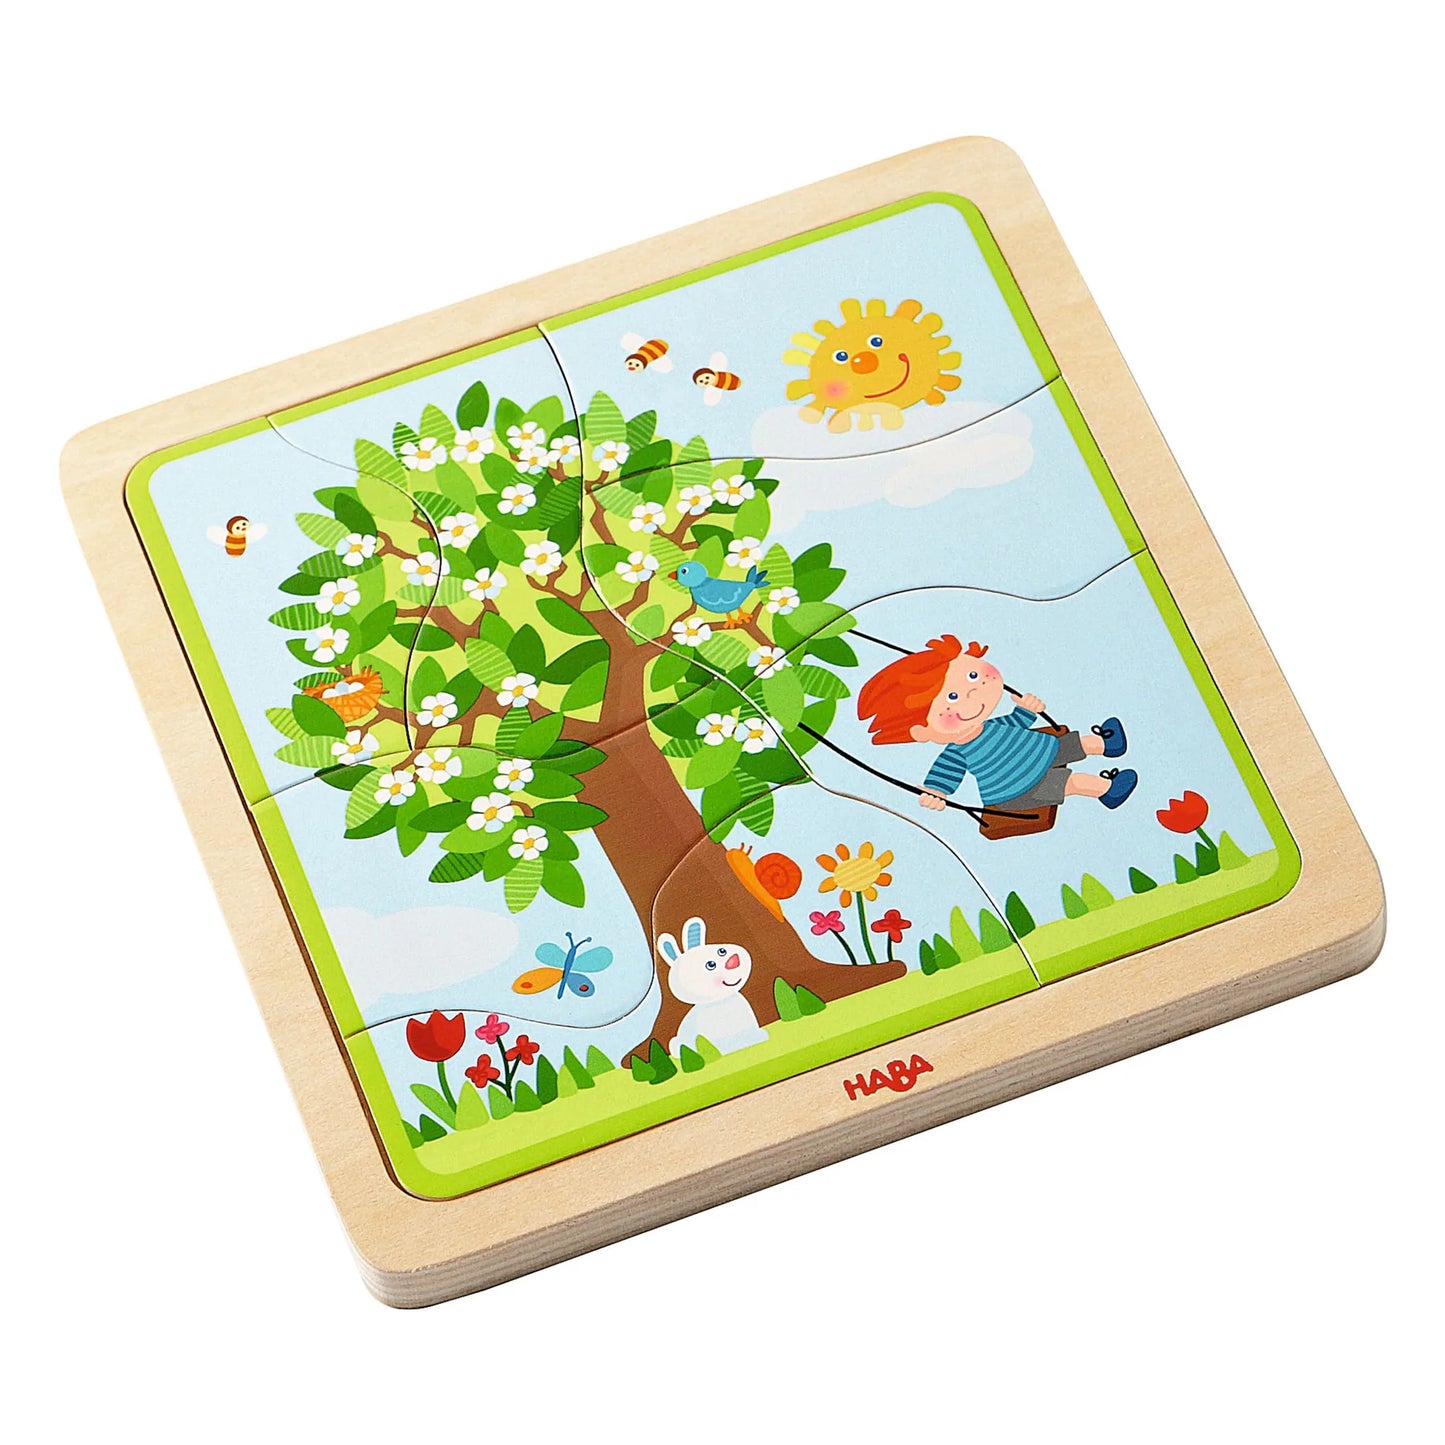 Haba Haba My Time of the Year - 4 Seasons Layer Puzzle - blueottertoys-HB302529